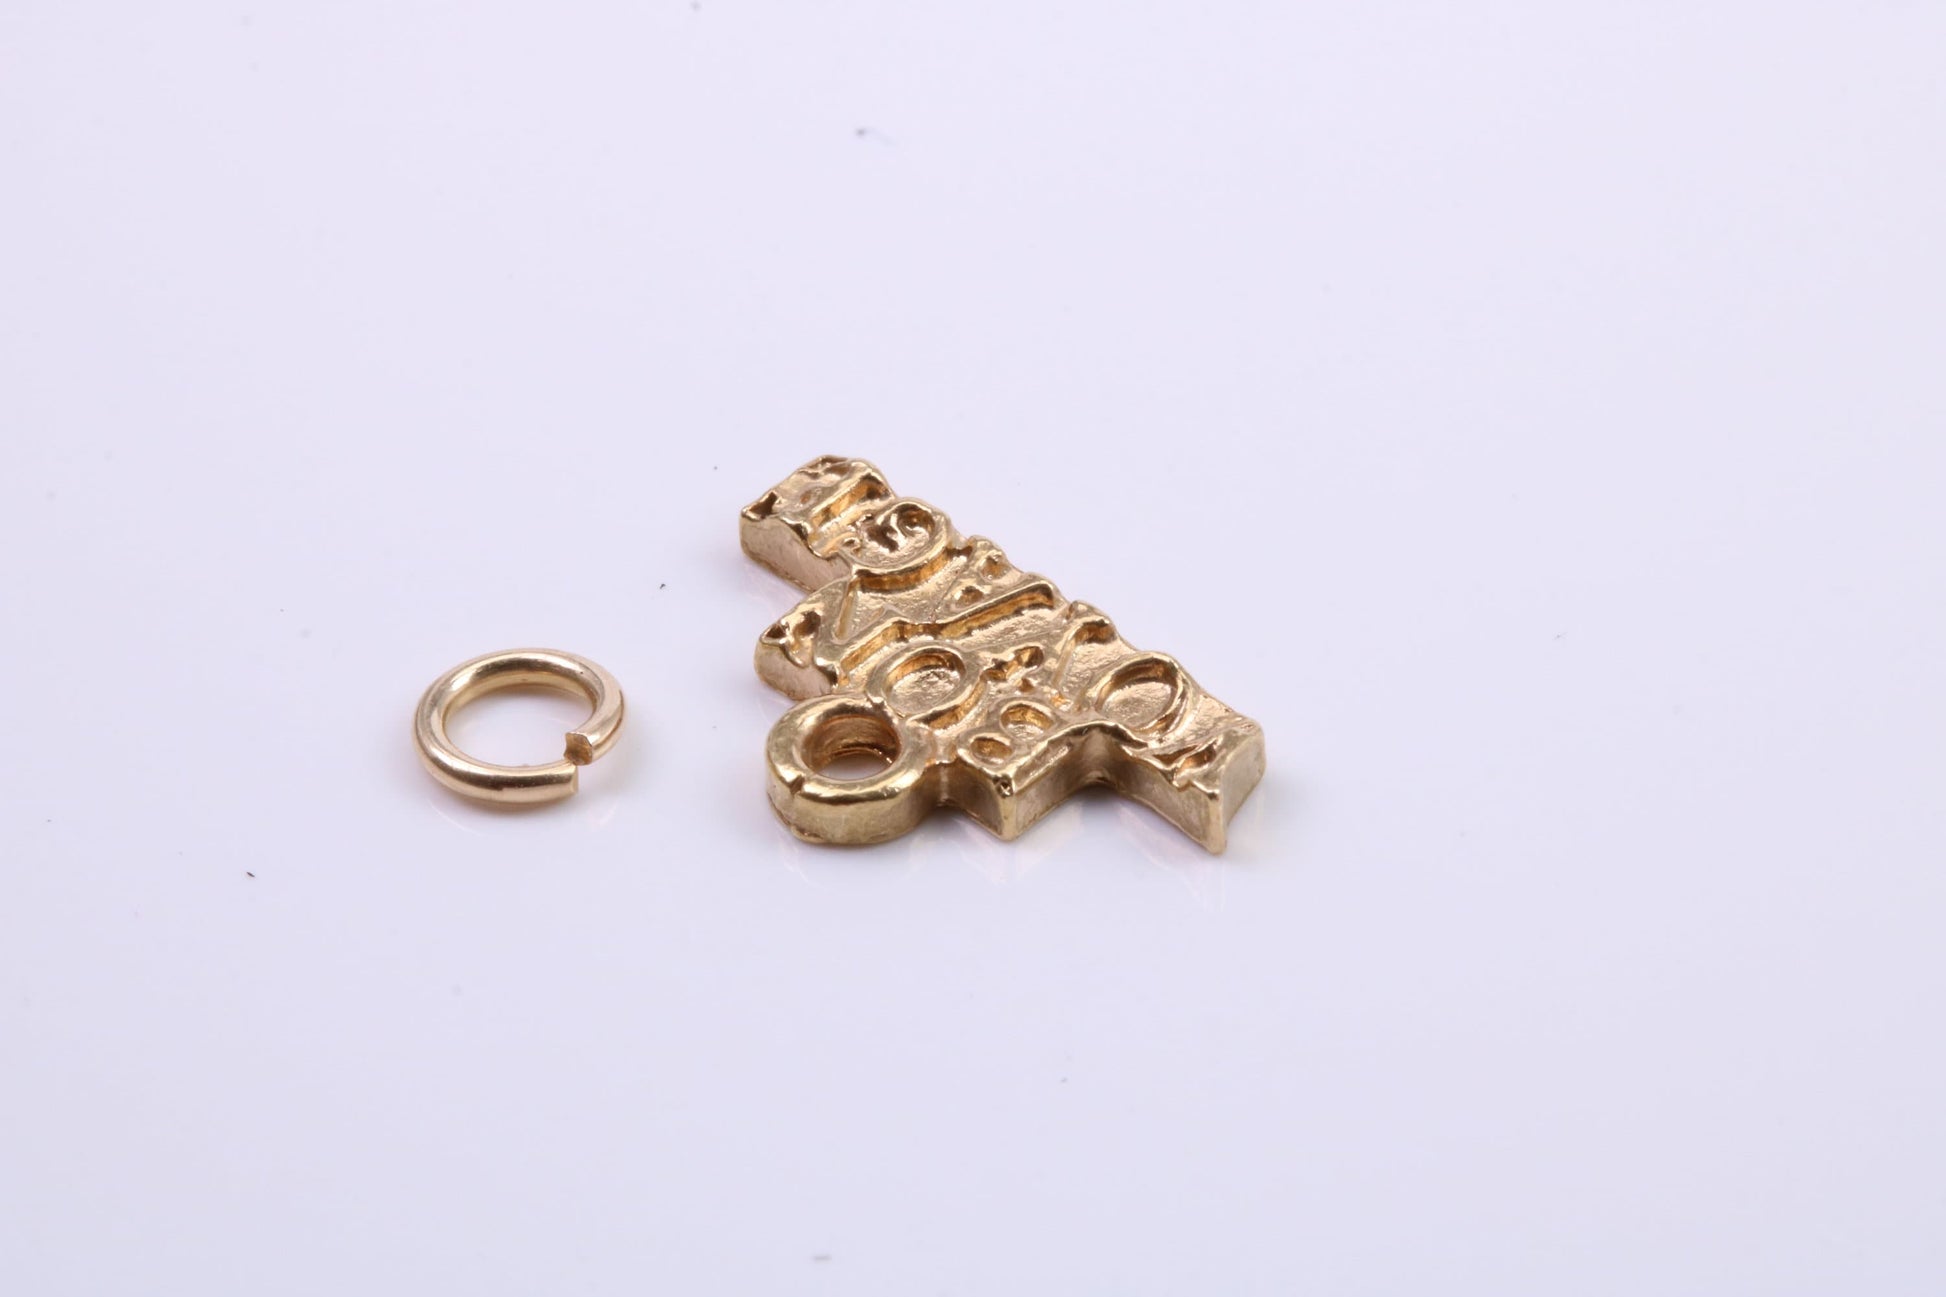 Bon Voyage Charm, Traditional Charm, Made from Solid 9ct Yellow Gold, British Hallmarked, Complete with Attachment Link